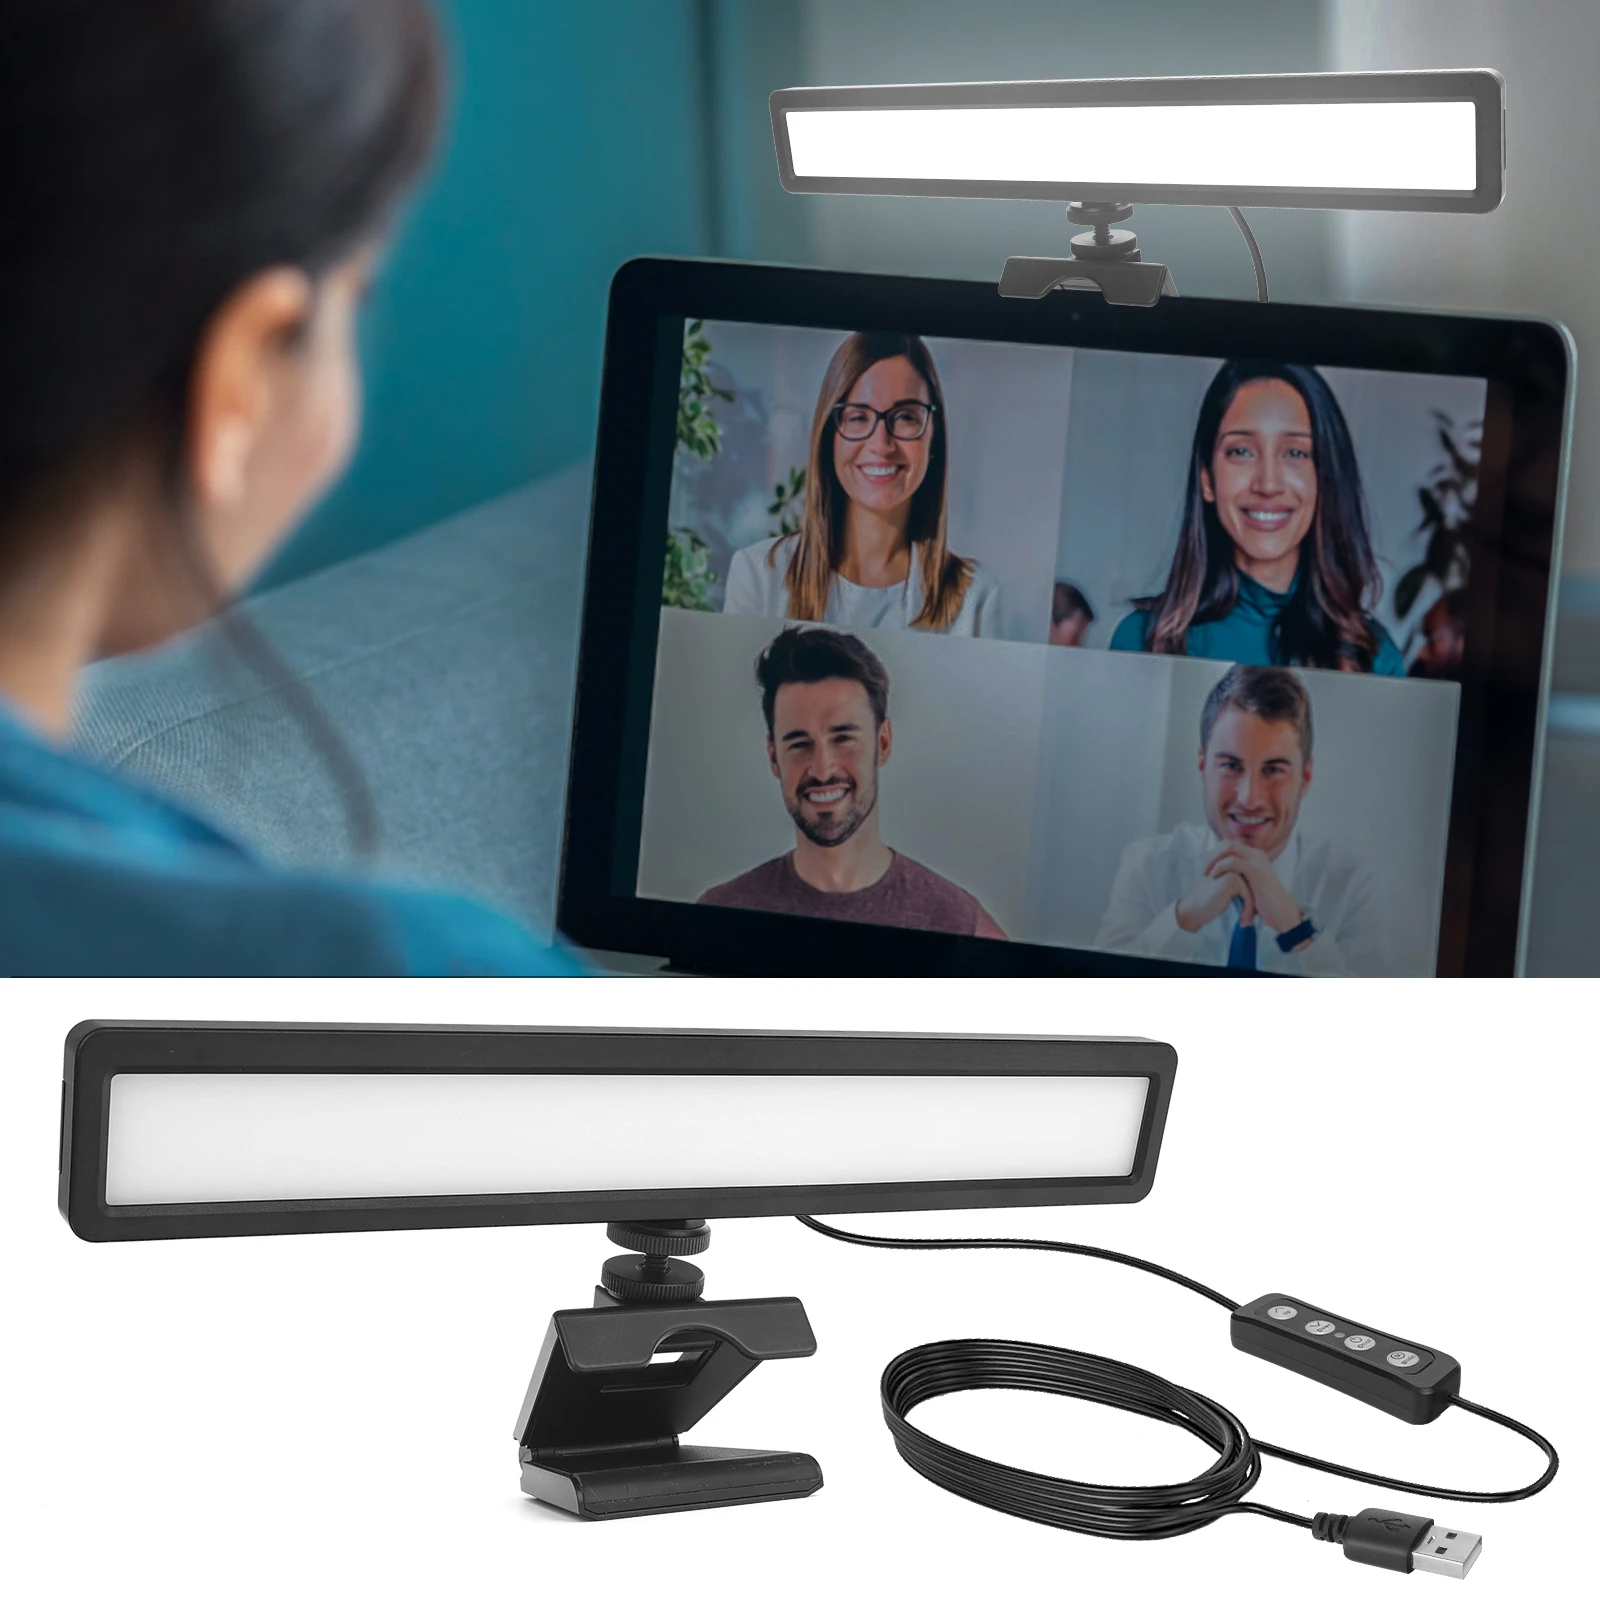 

LUXCEO WS66 LED Screen Light Bar PC Laptop Fill Lamp with Clip Tripod For Selfie Live Streaming Office Meeting Lighting